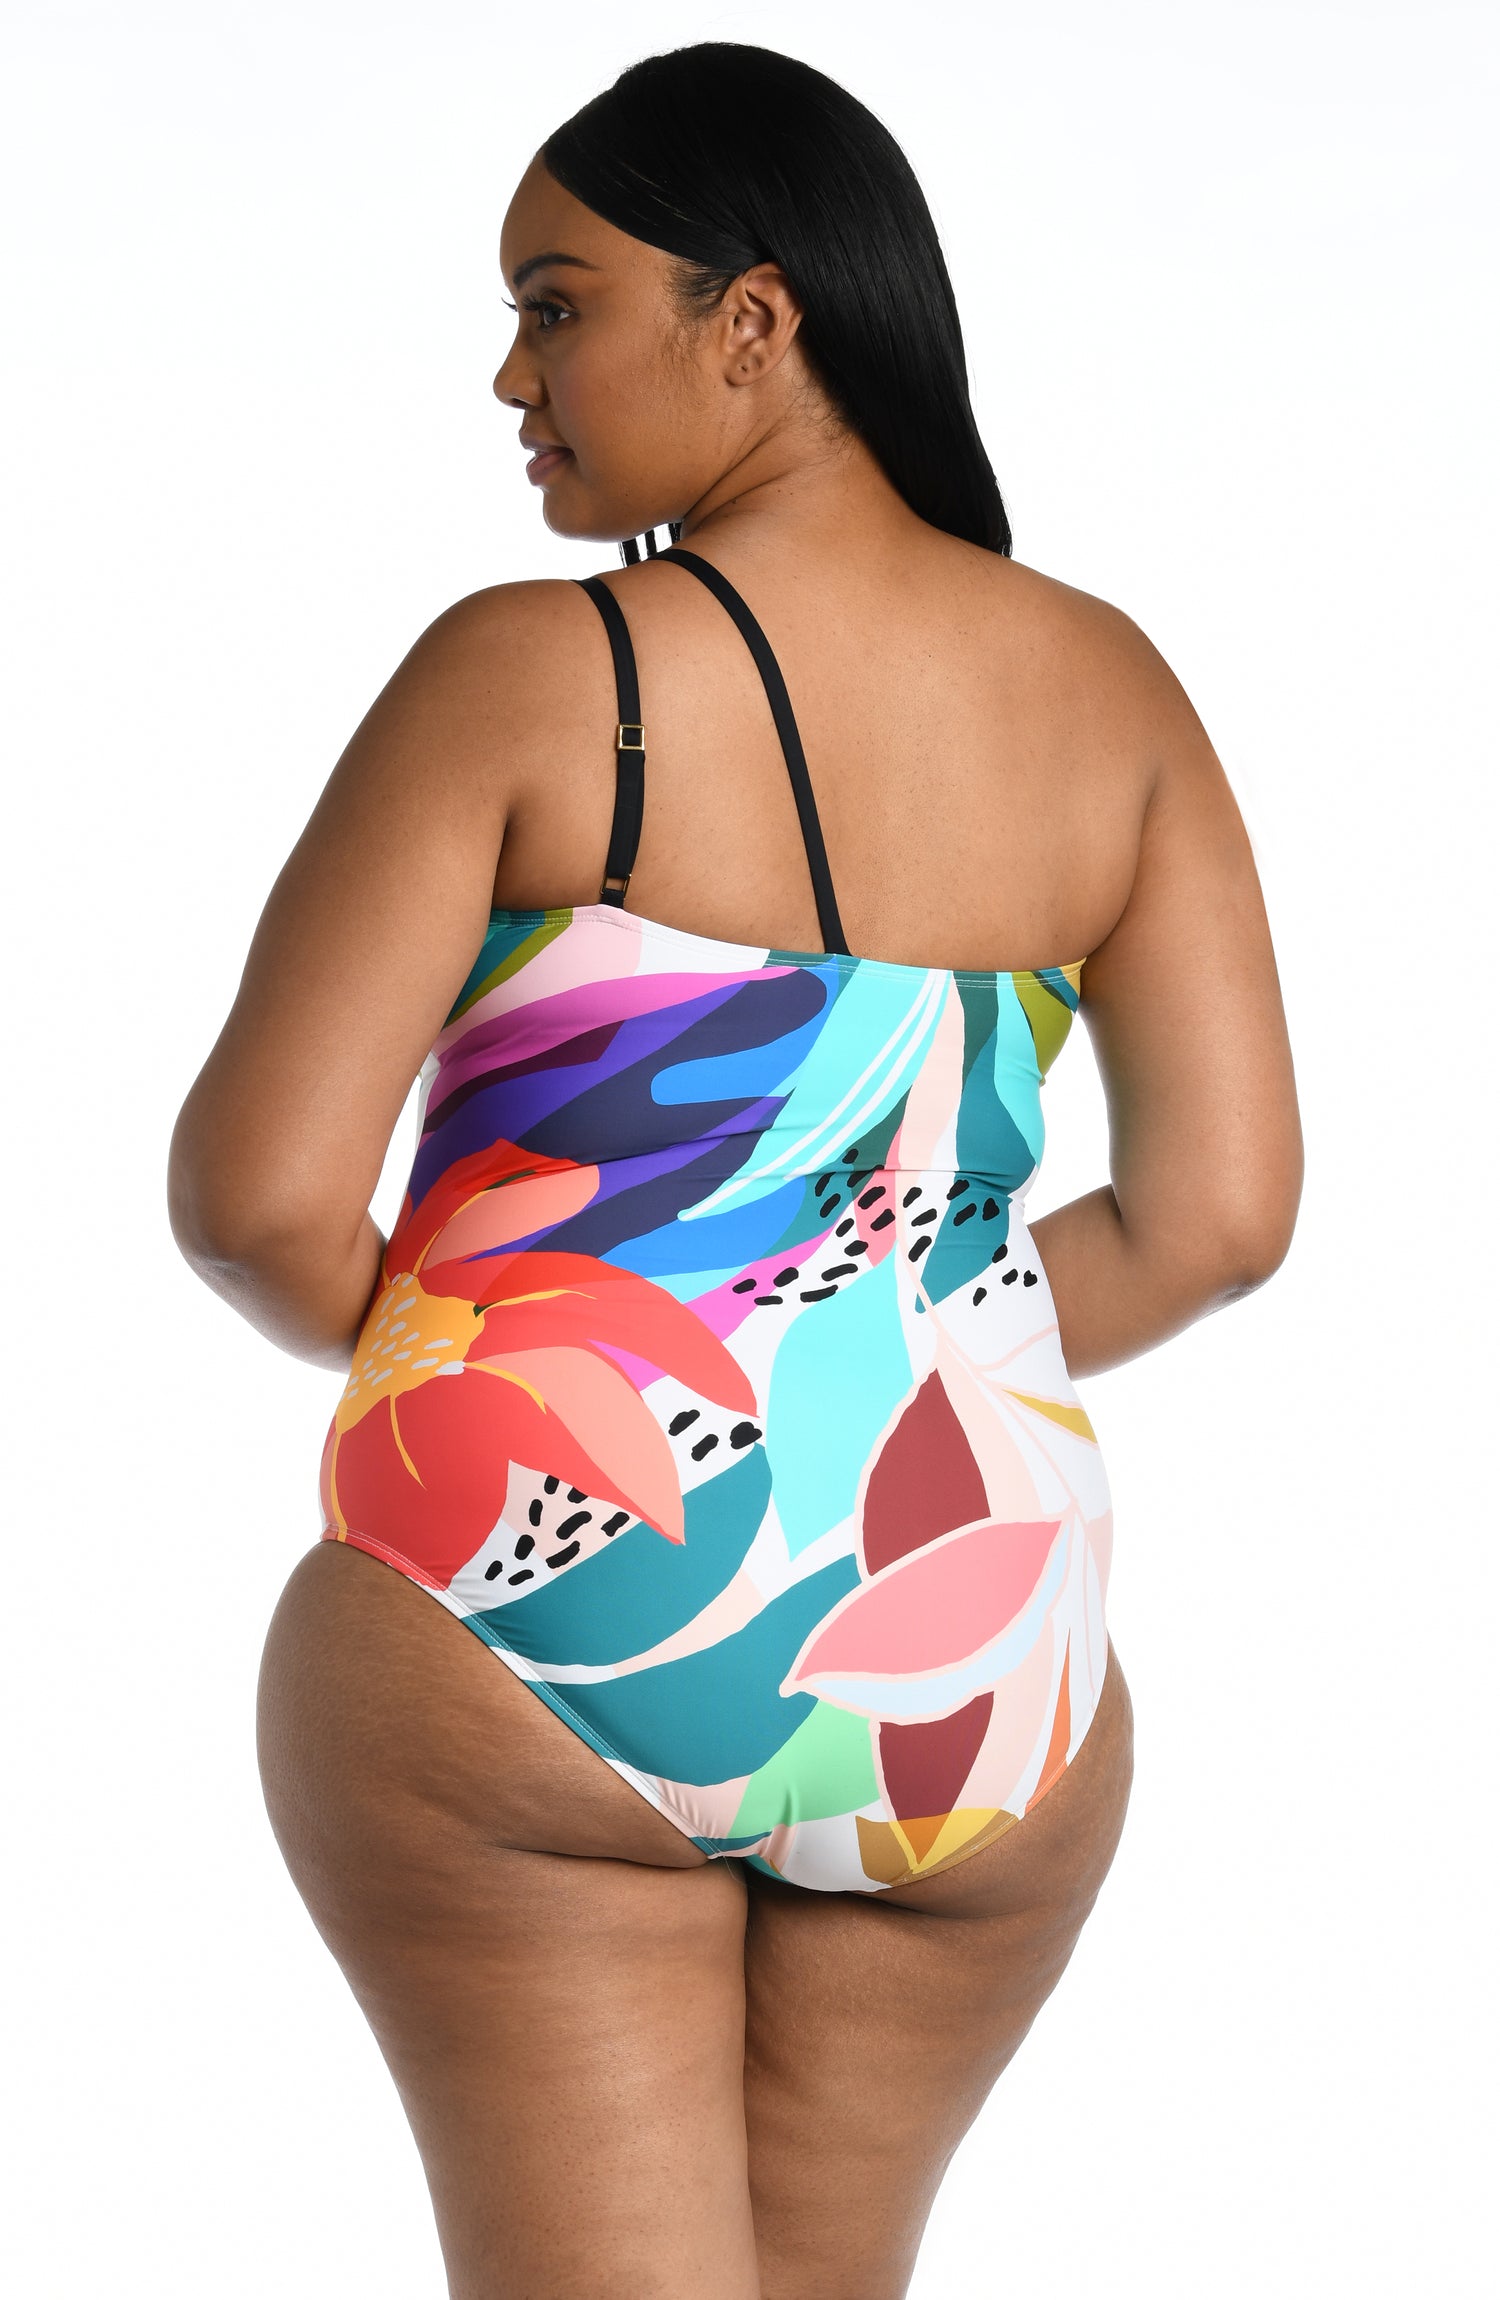 Model is wearing a multi colored tropical printed one piece swimsuit from our Eclectic Shore collection.